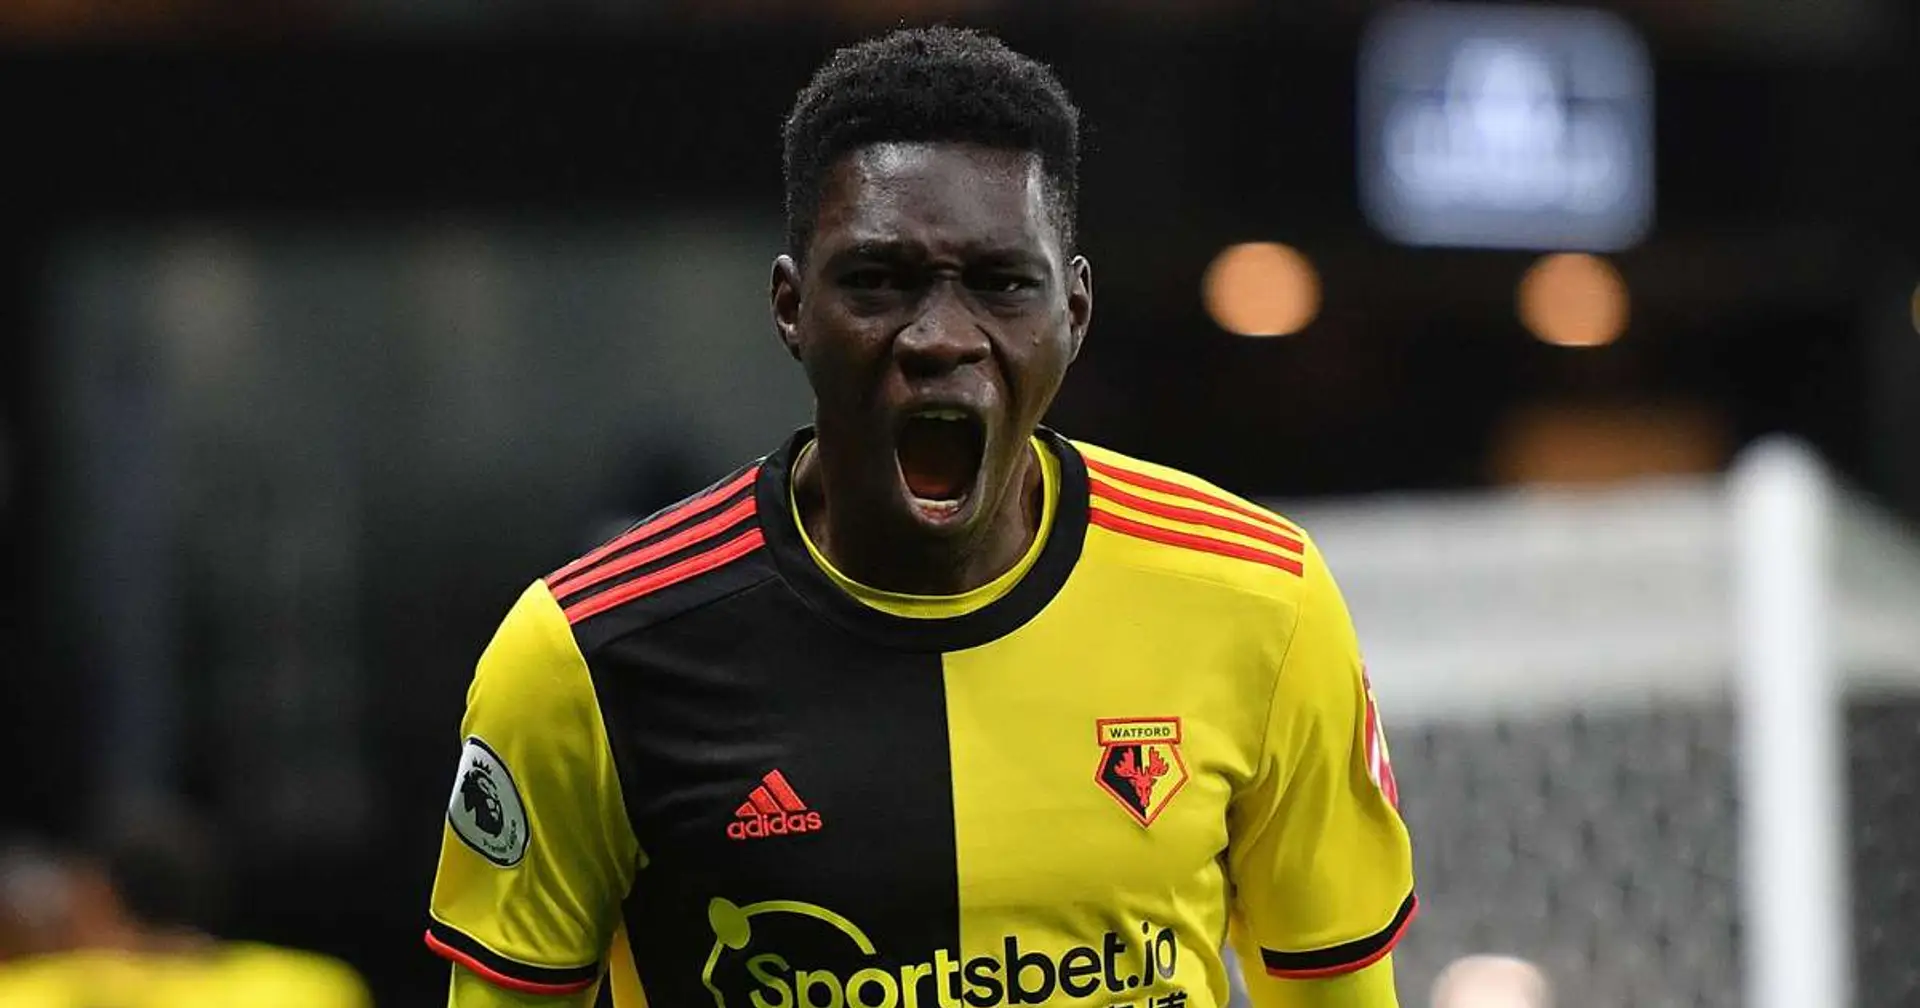 Man United 'make contact' for Ismaila Sarr as Sancho deal remains in limbo (reliability: 4 stars)